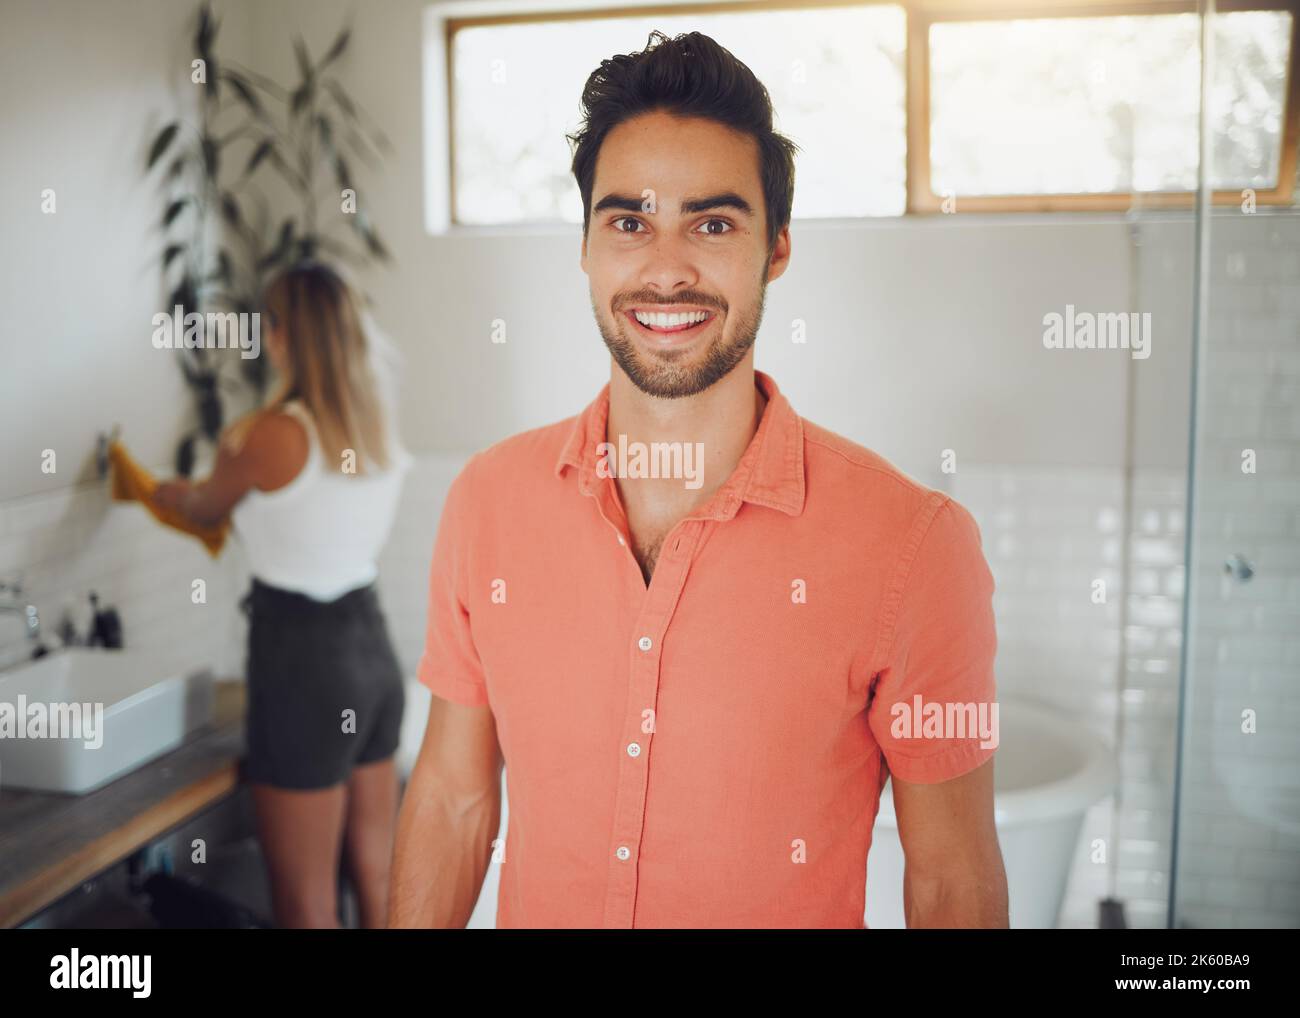 Portrait of a young caucasian couple sharing a bathroom with focus on happy young man smiling showing perfect teeth while looking at the camera in the Stock Photo